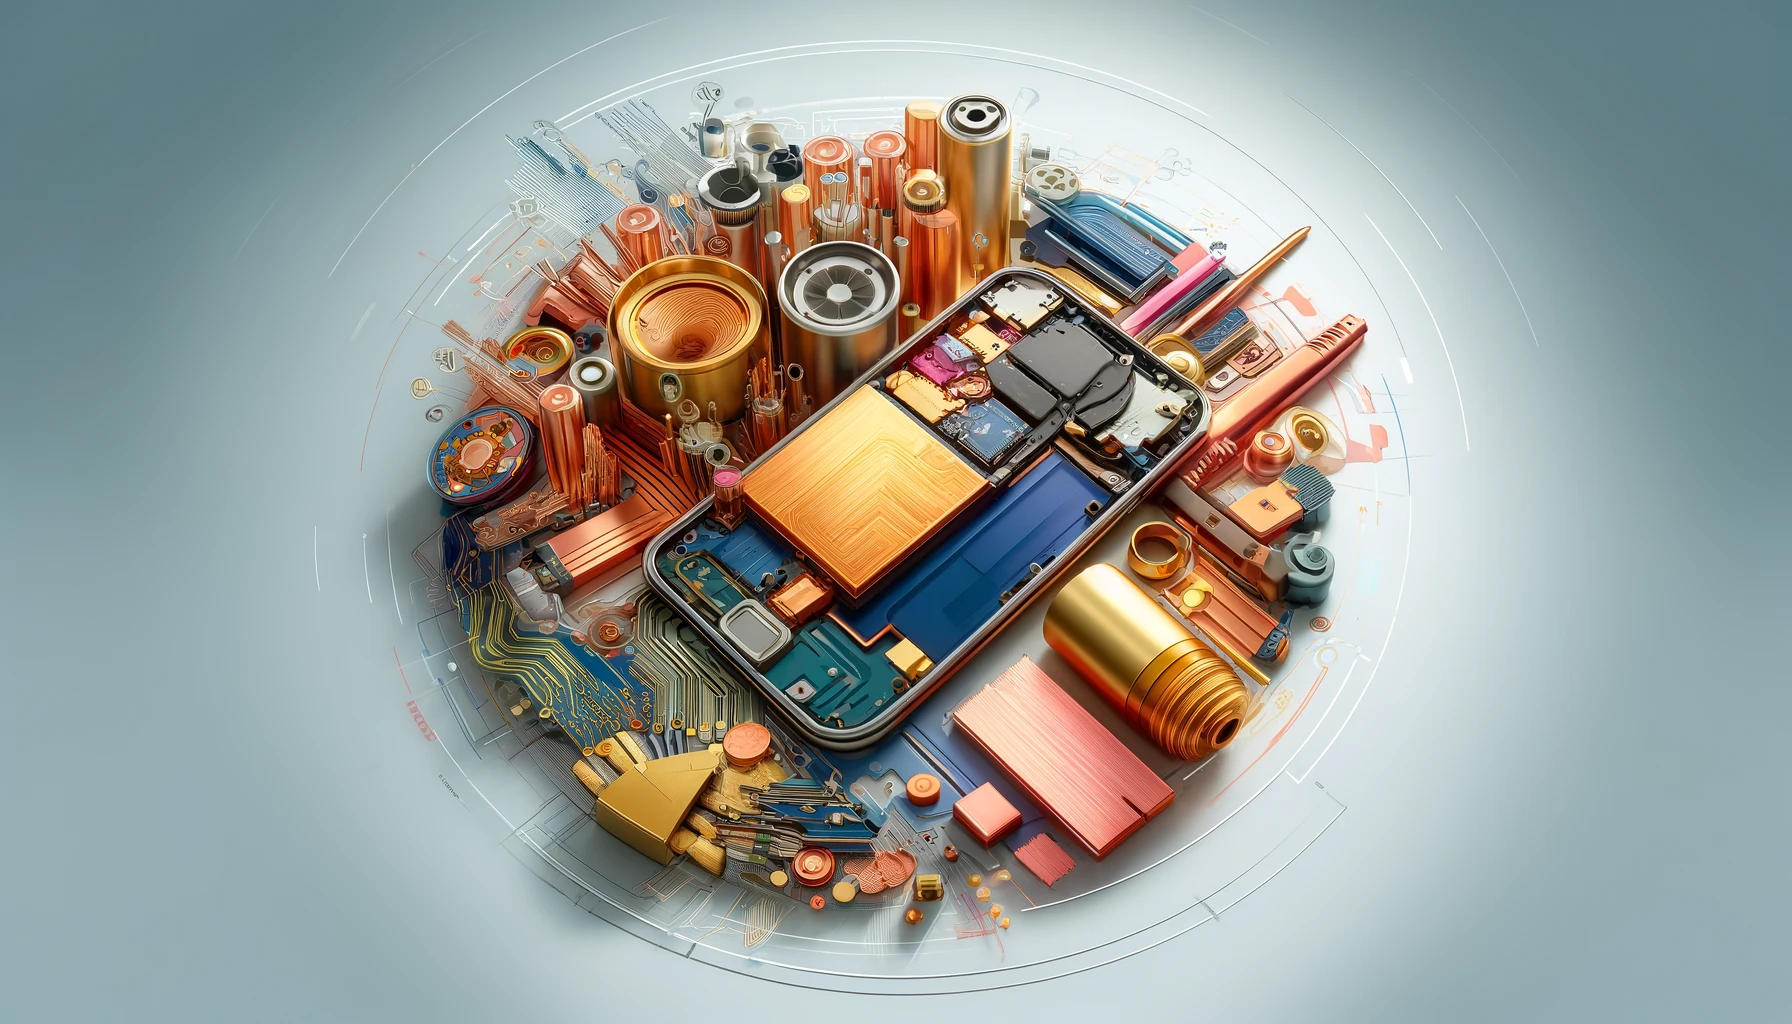 Circular Economy and Tech: Creating Sustainable Value from E-Waste